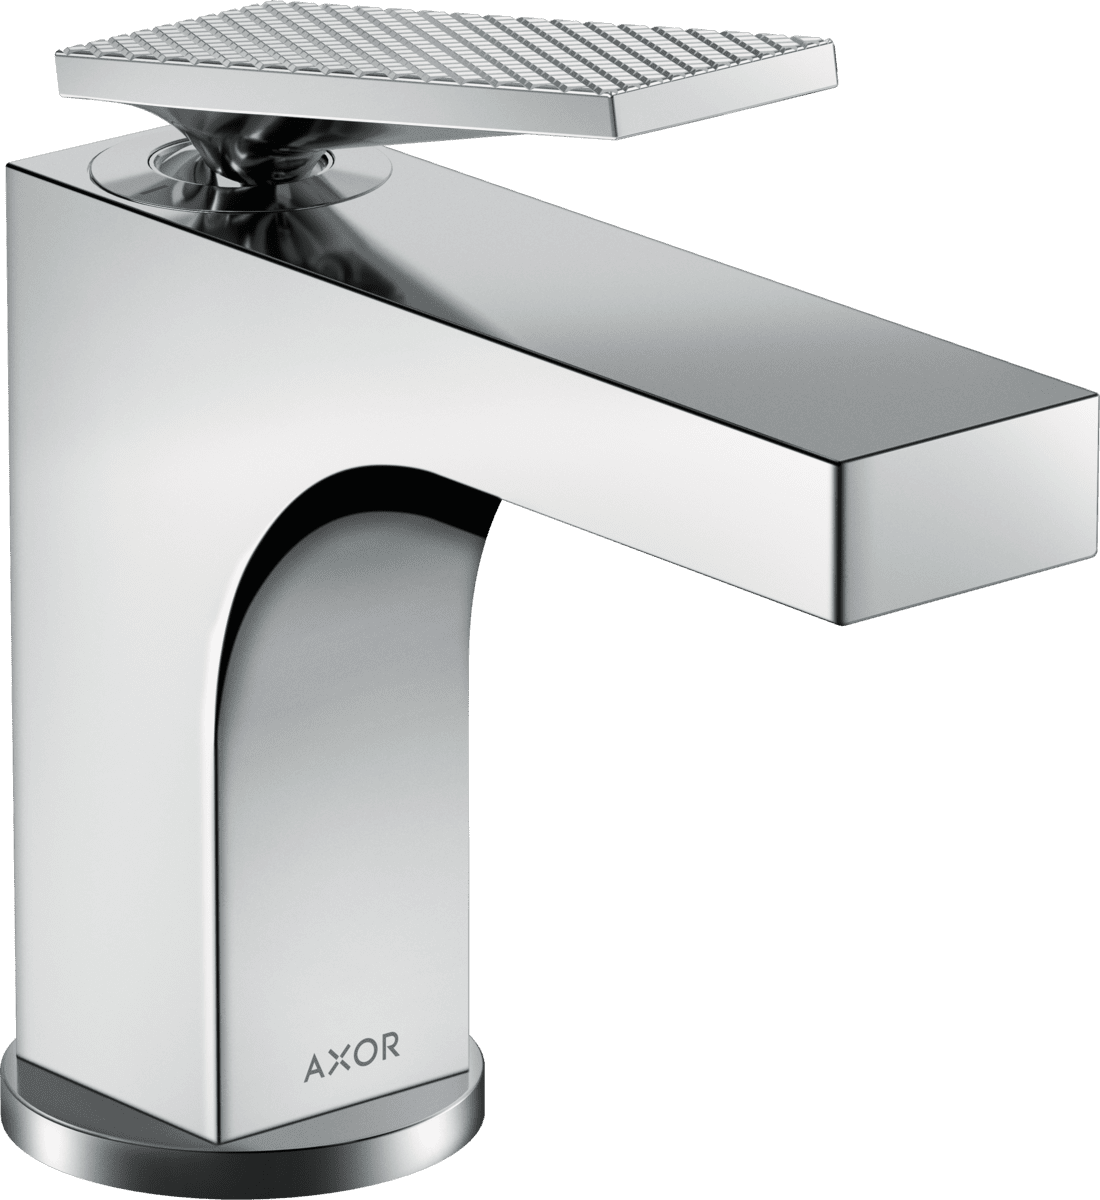 Picture of HANSGROHE AXOR Citterio Single lever basin mixer 90 with lever handle for hand wash basins with pop-up waste set - rhombic cut #39001000 - Chrome